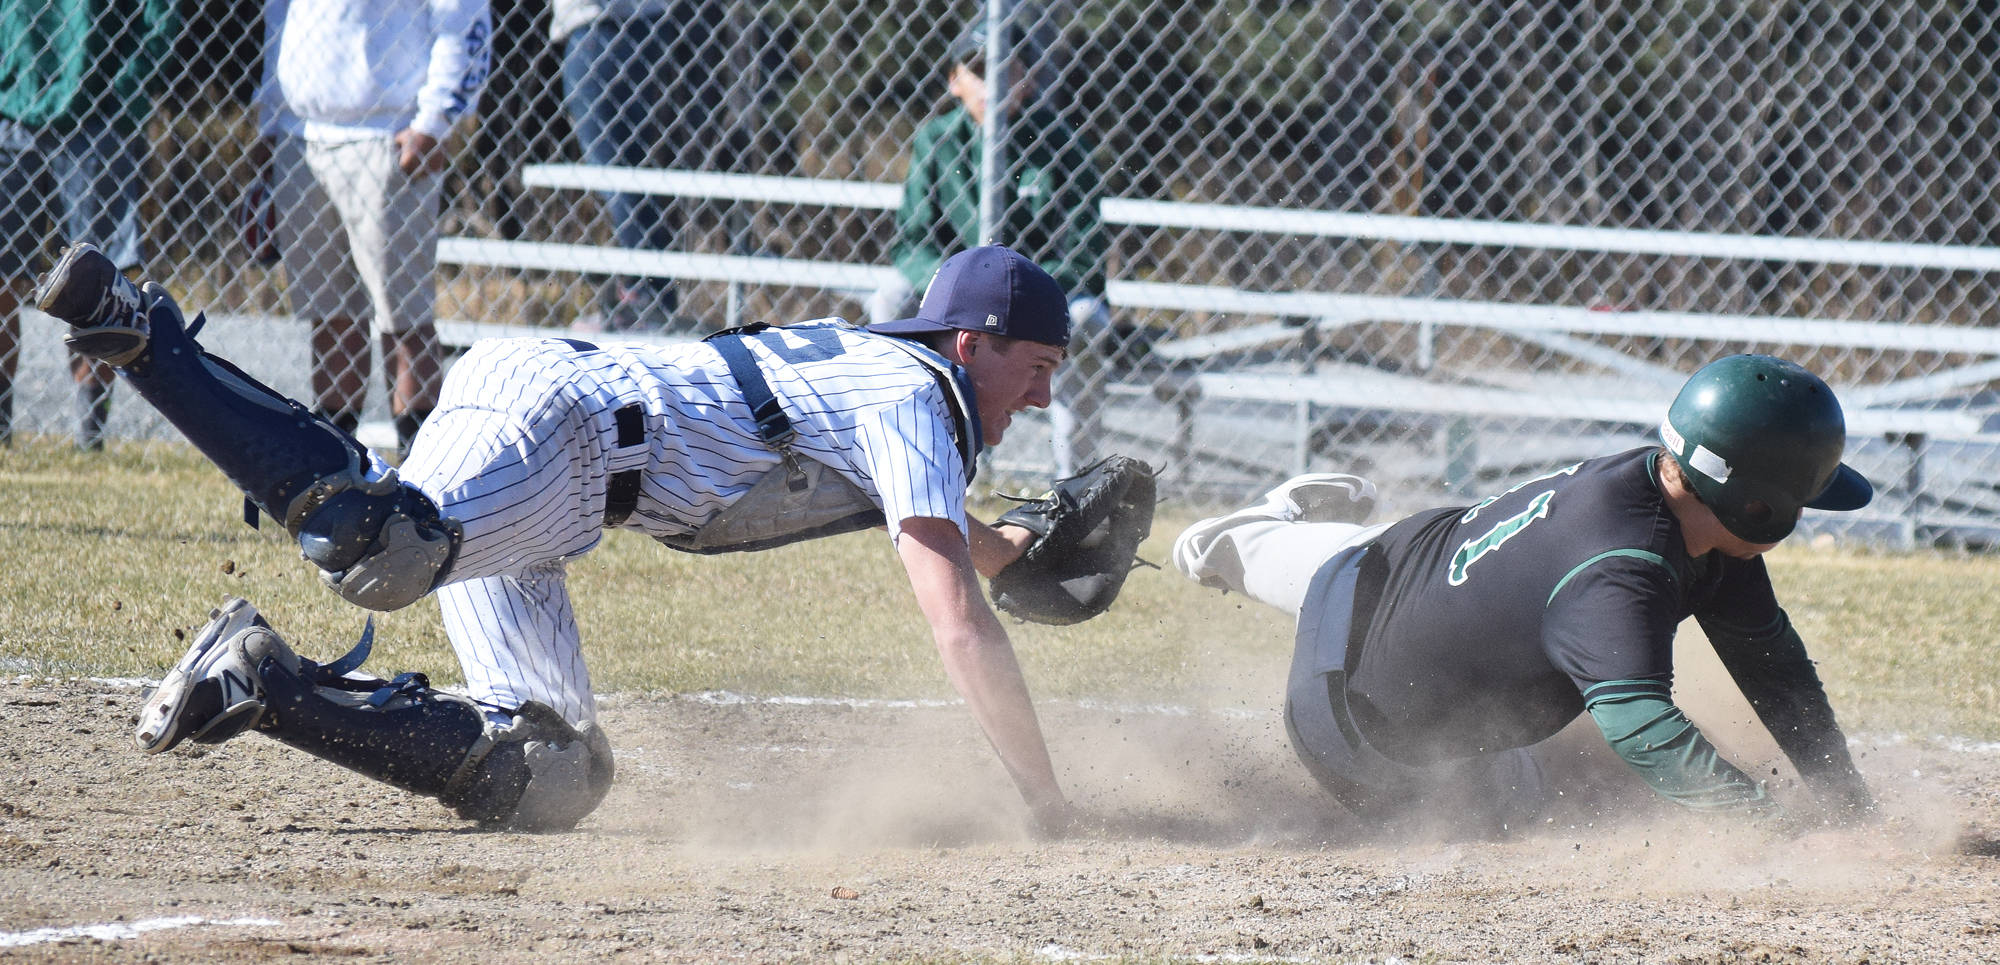 Soldotna catcher Cody Quelland (left) tags out Colony’s Zach Satterly in a Southcentral Conference contest May 9, 2017, at the Soldotna baseball fields. (Photo by Joey Klecka/Peninsula Clarion)